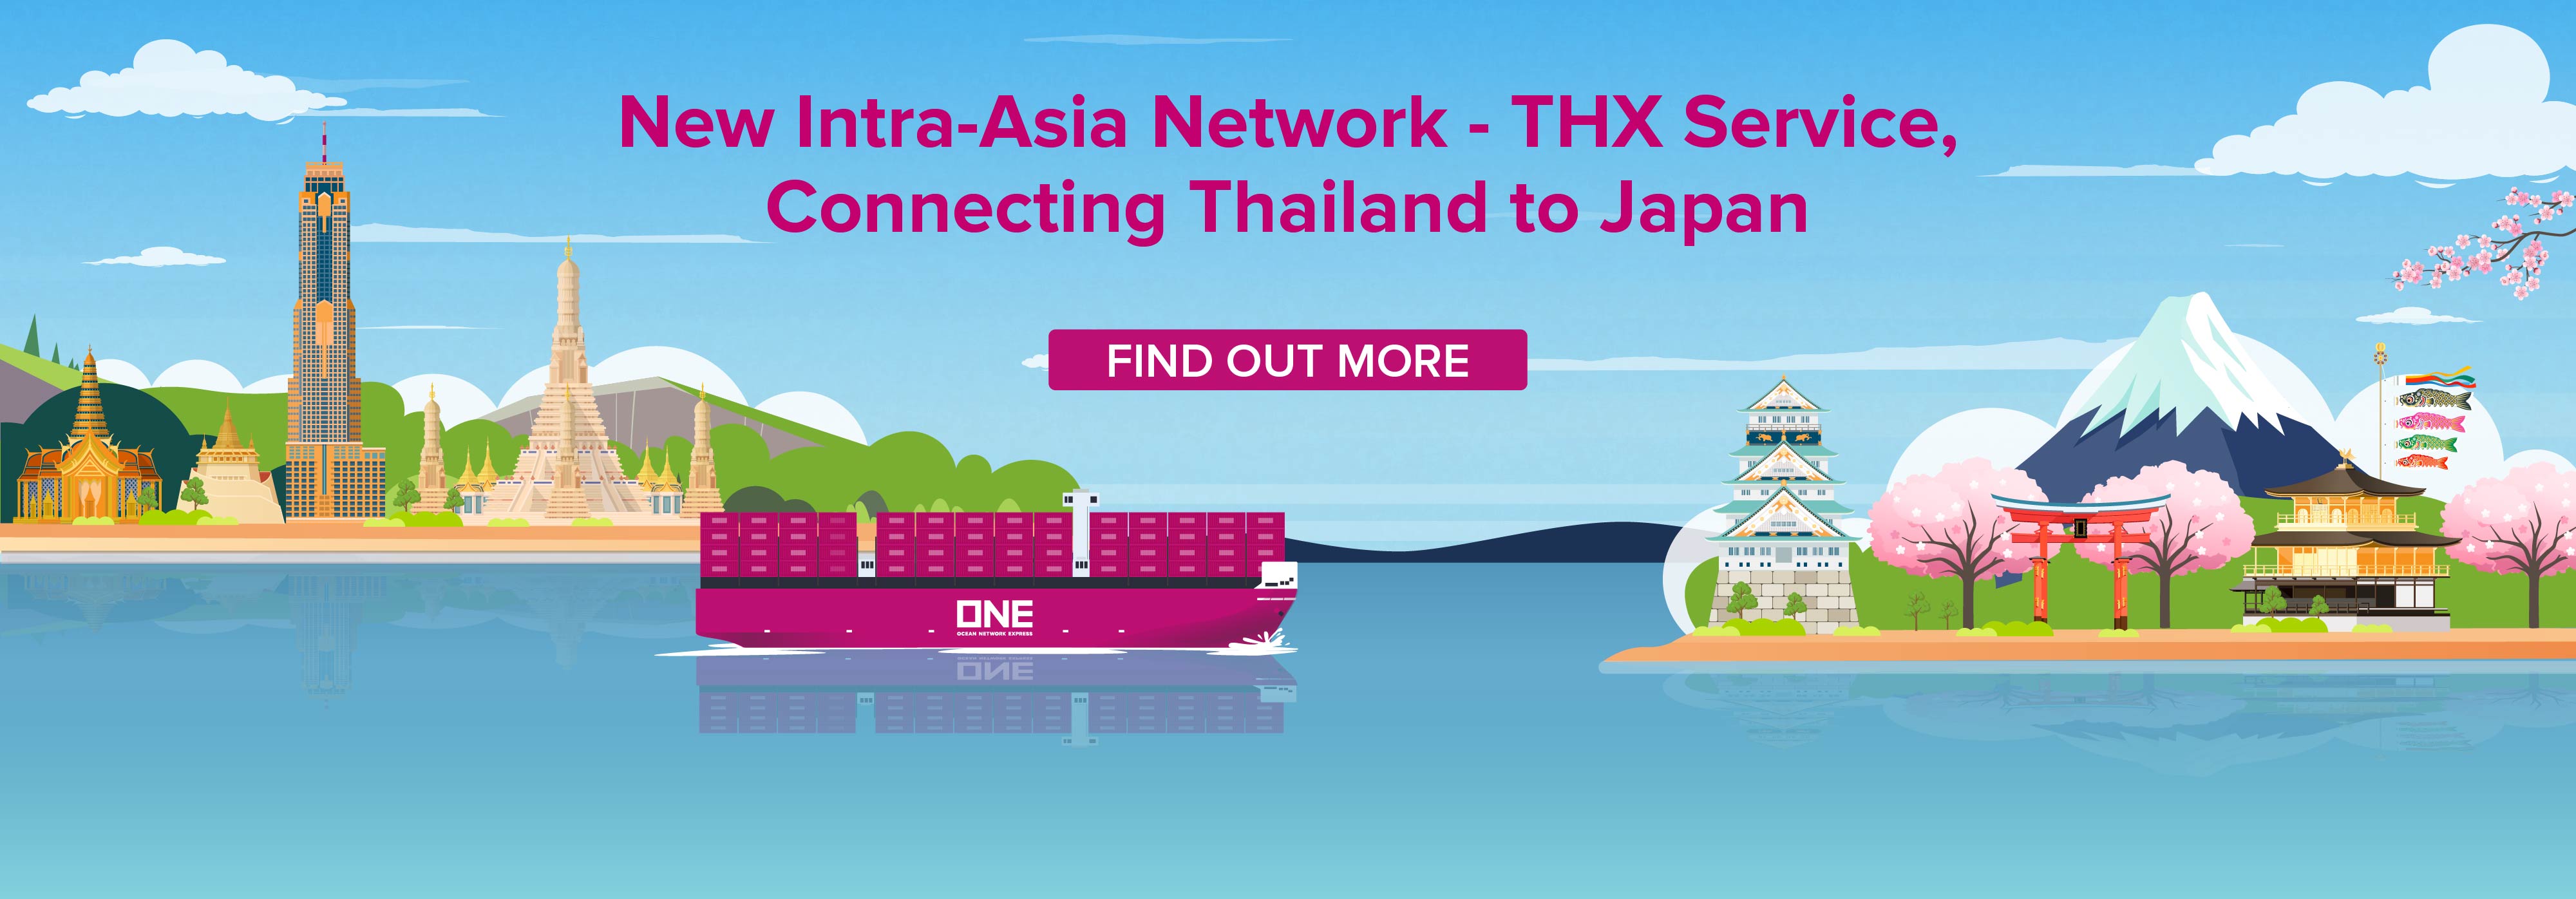 New Intra-Asia Network - THX Service, Connecting Thailand to Japan